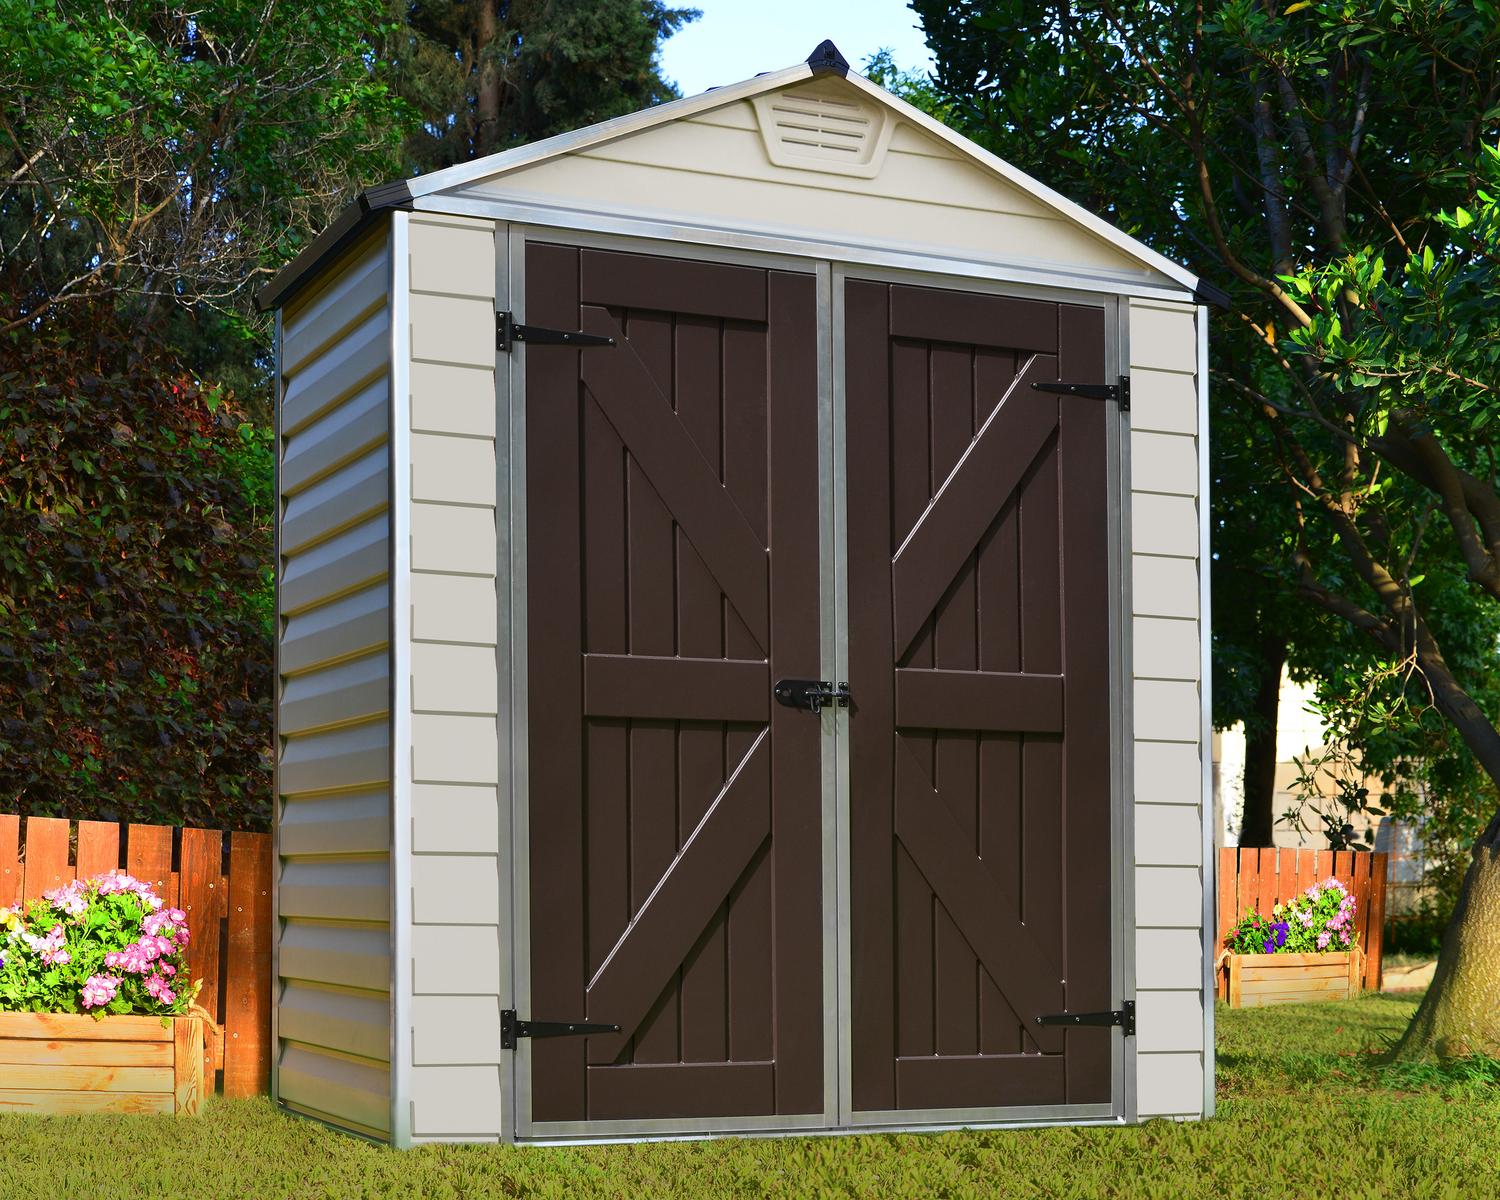 Skylight 6 ft. x 3 ft. Garden Storage Shed Plastic with Tan Polycarbonate Walls & Aluminium Frame